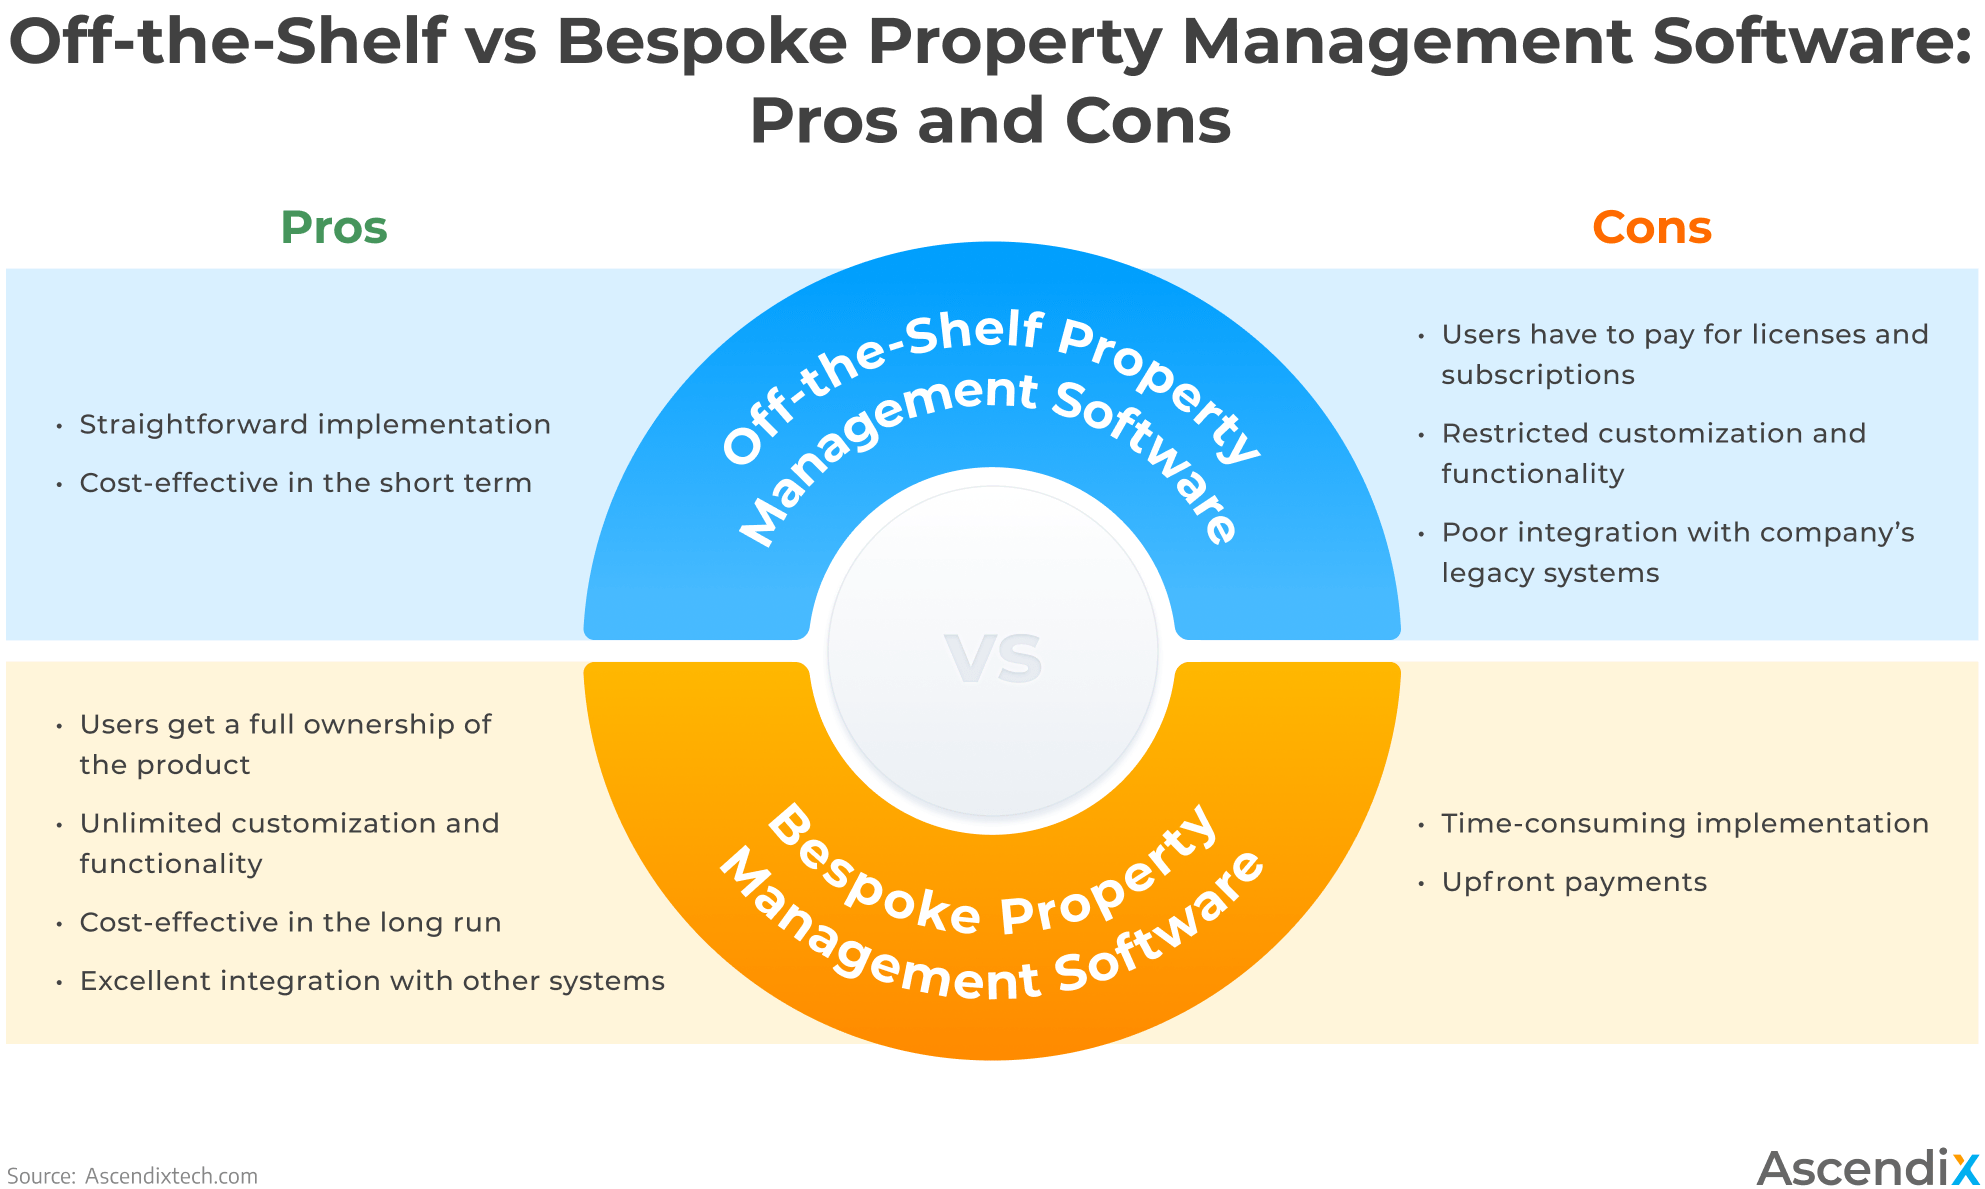 Off-the-Shelf vs Bespoke Property Management Software-Pros and Cons